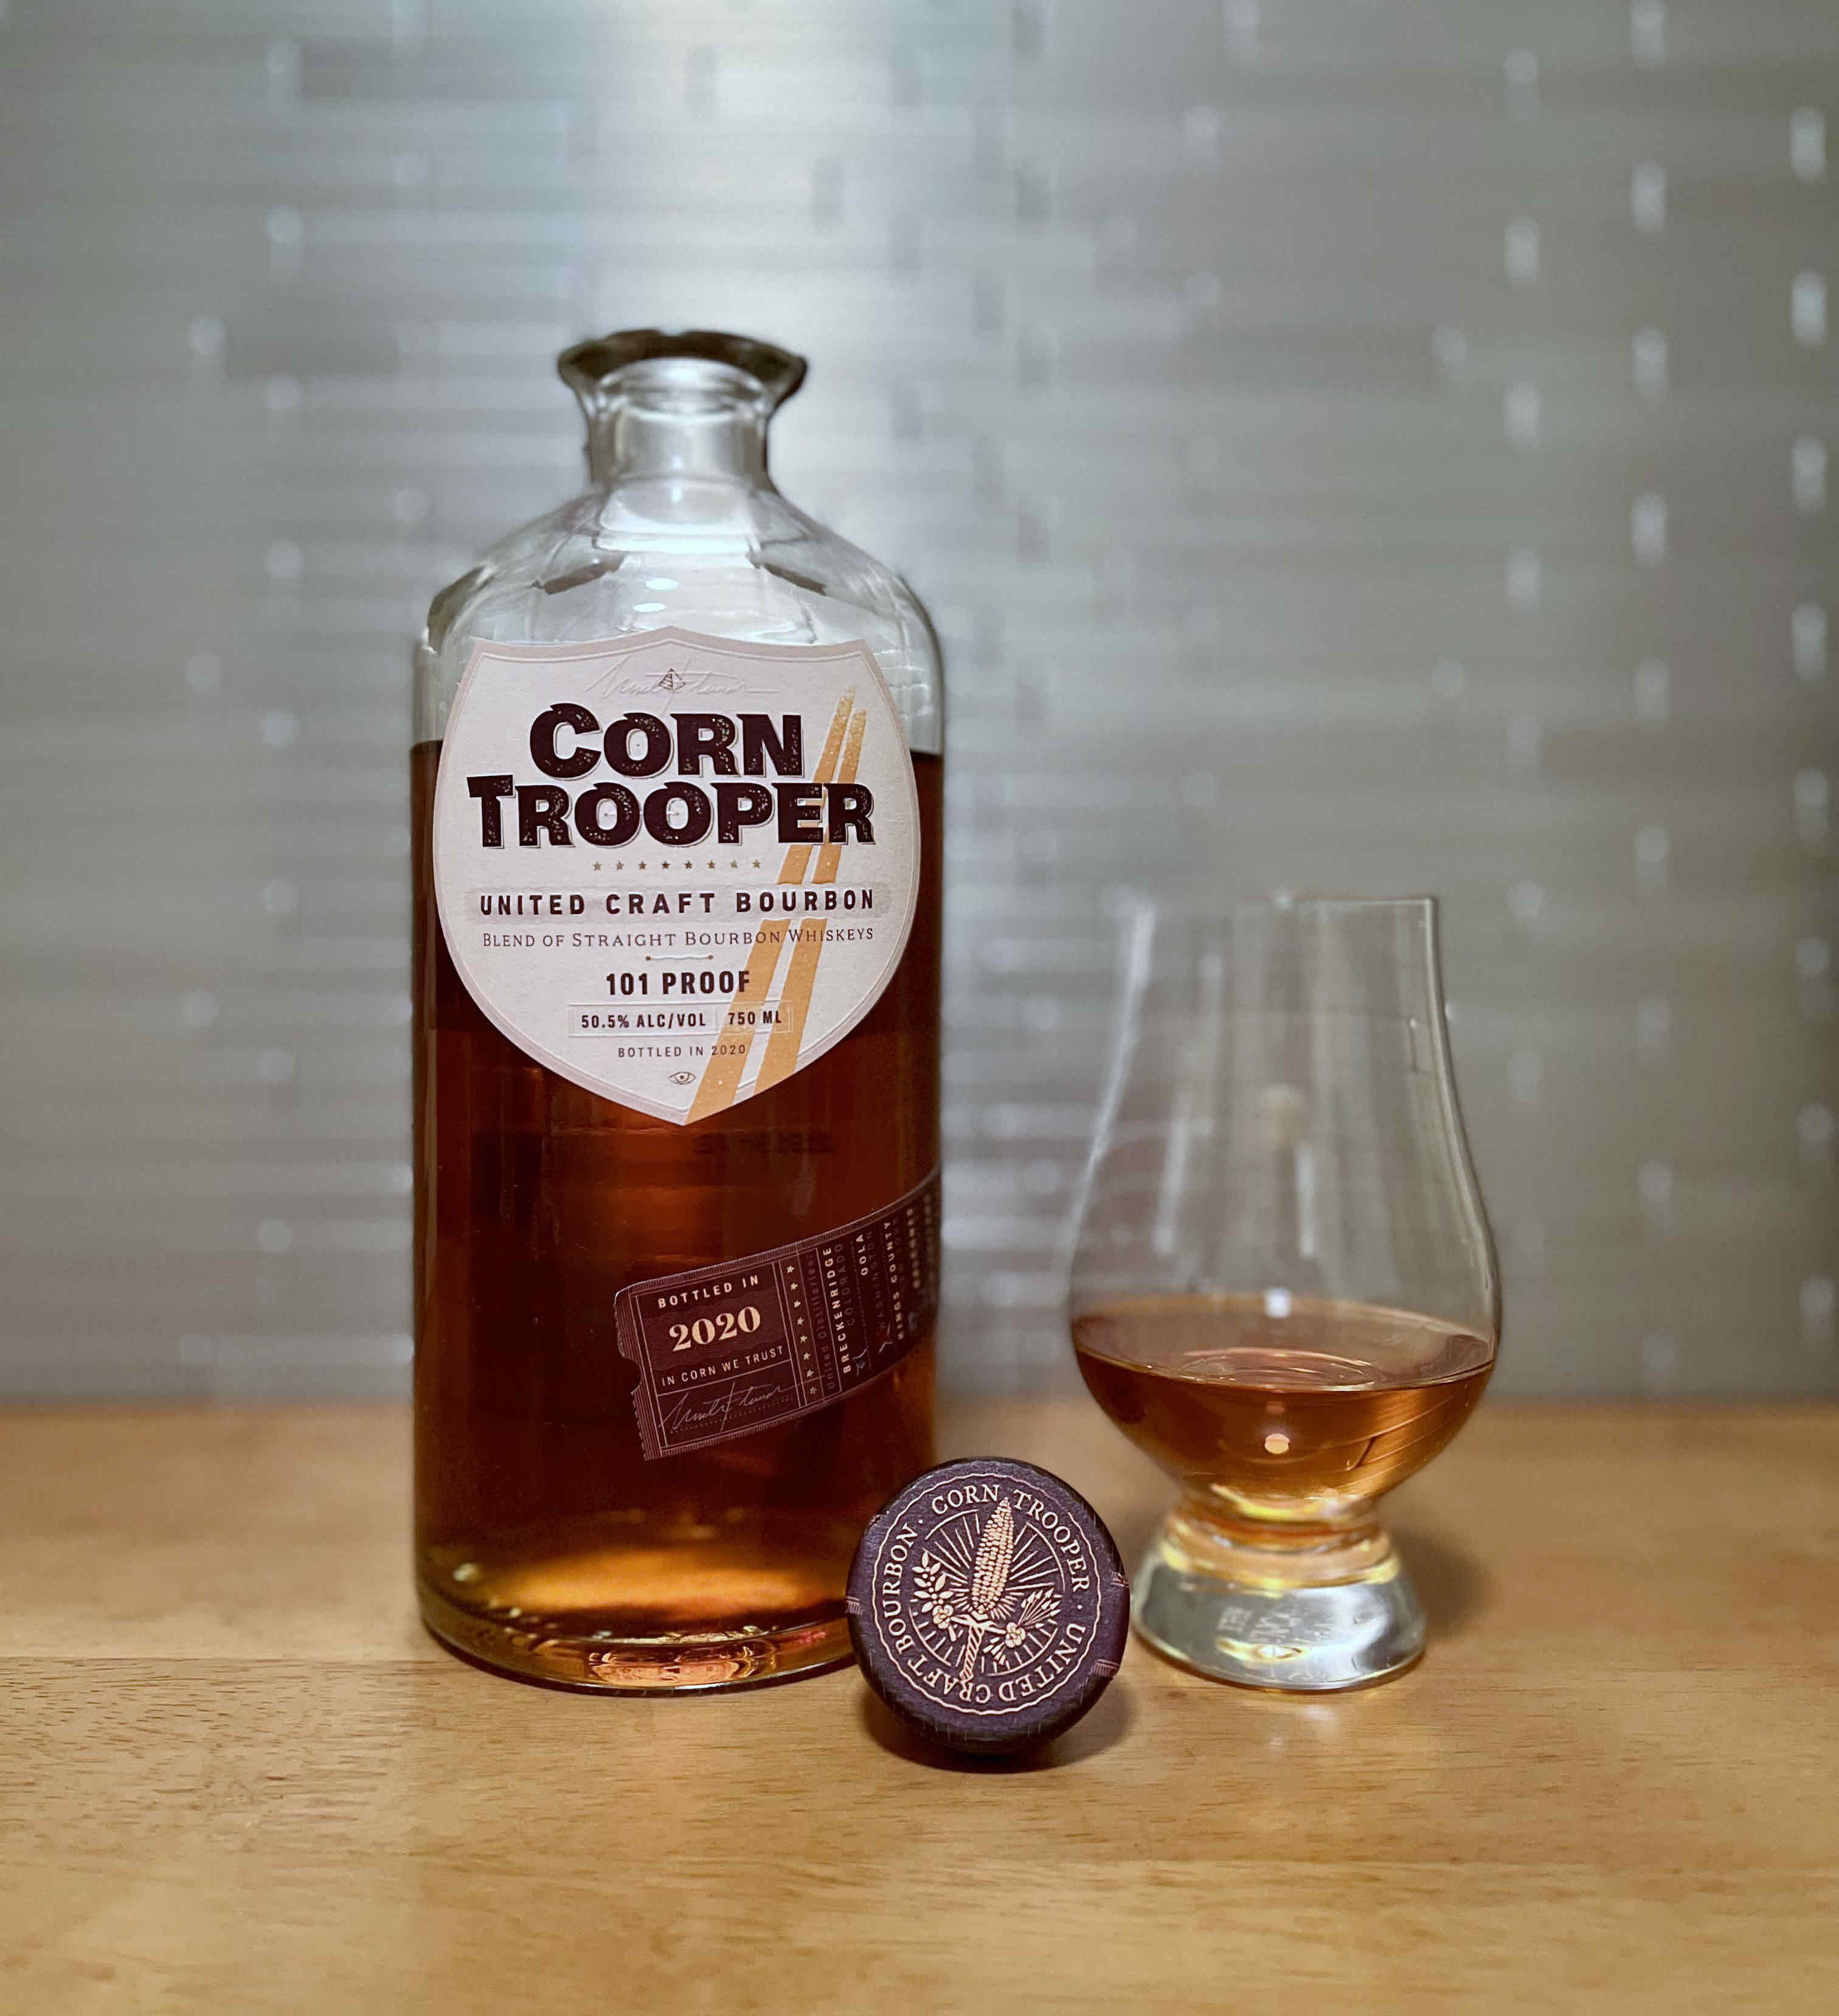 Corn Trooper - 2020 United Craft Bourbon from Flaviar brings together seven craft distillers on this blended whiskey.